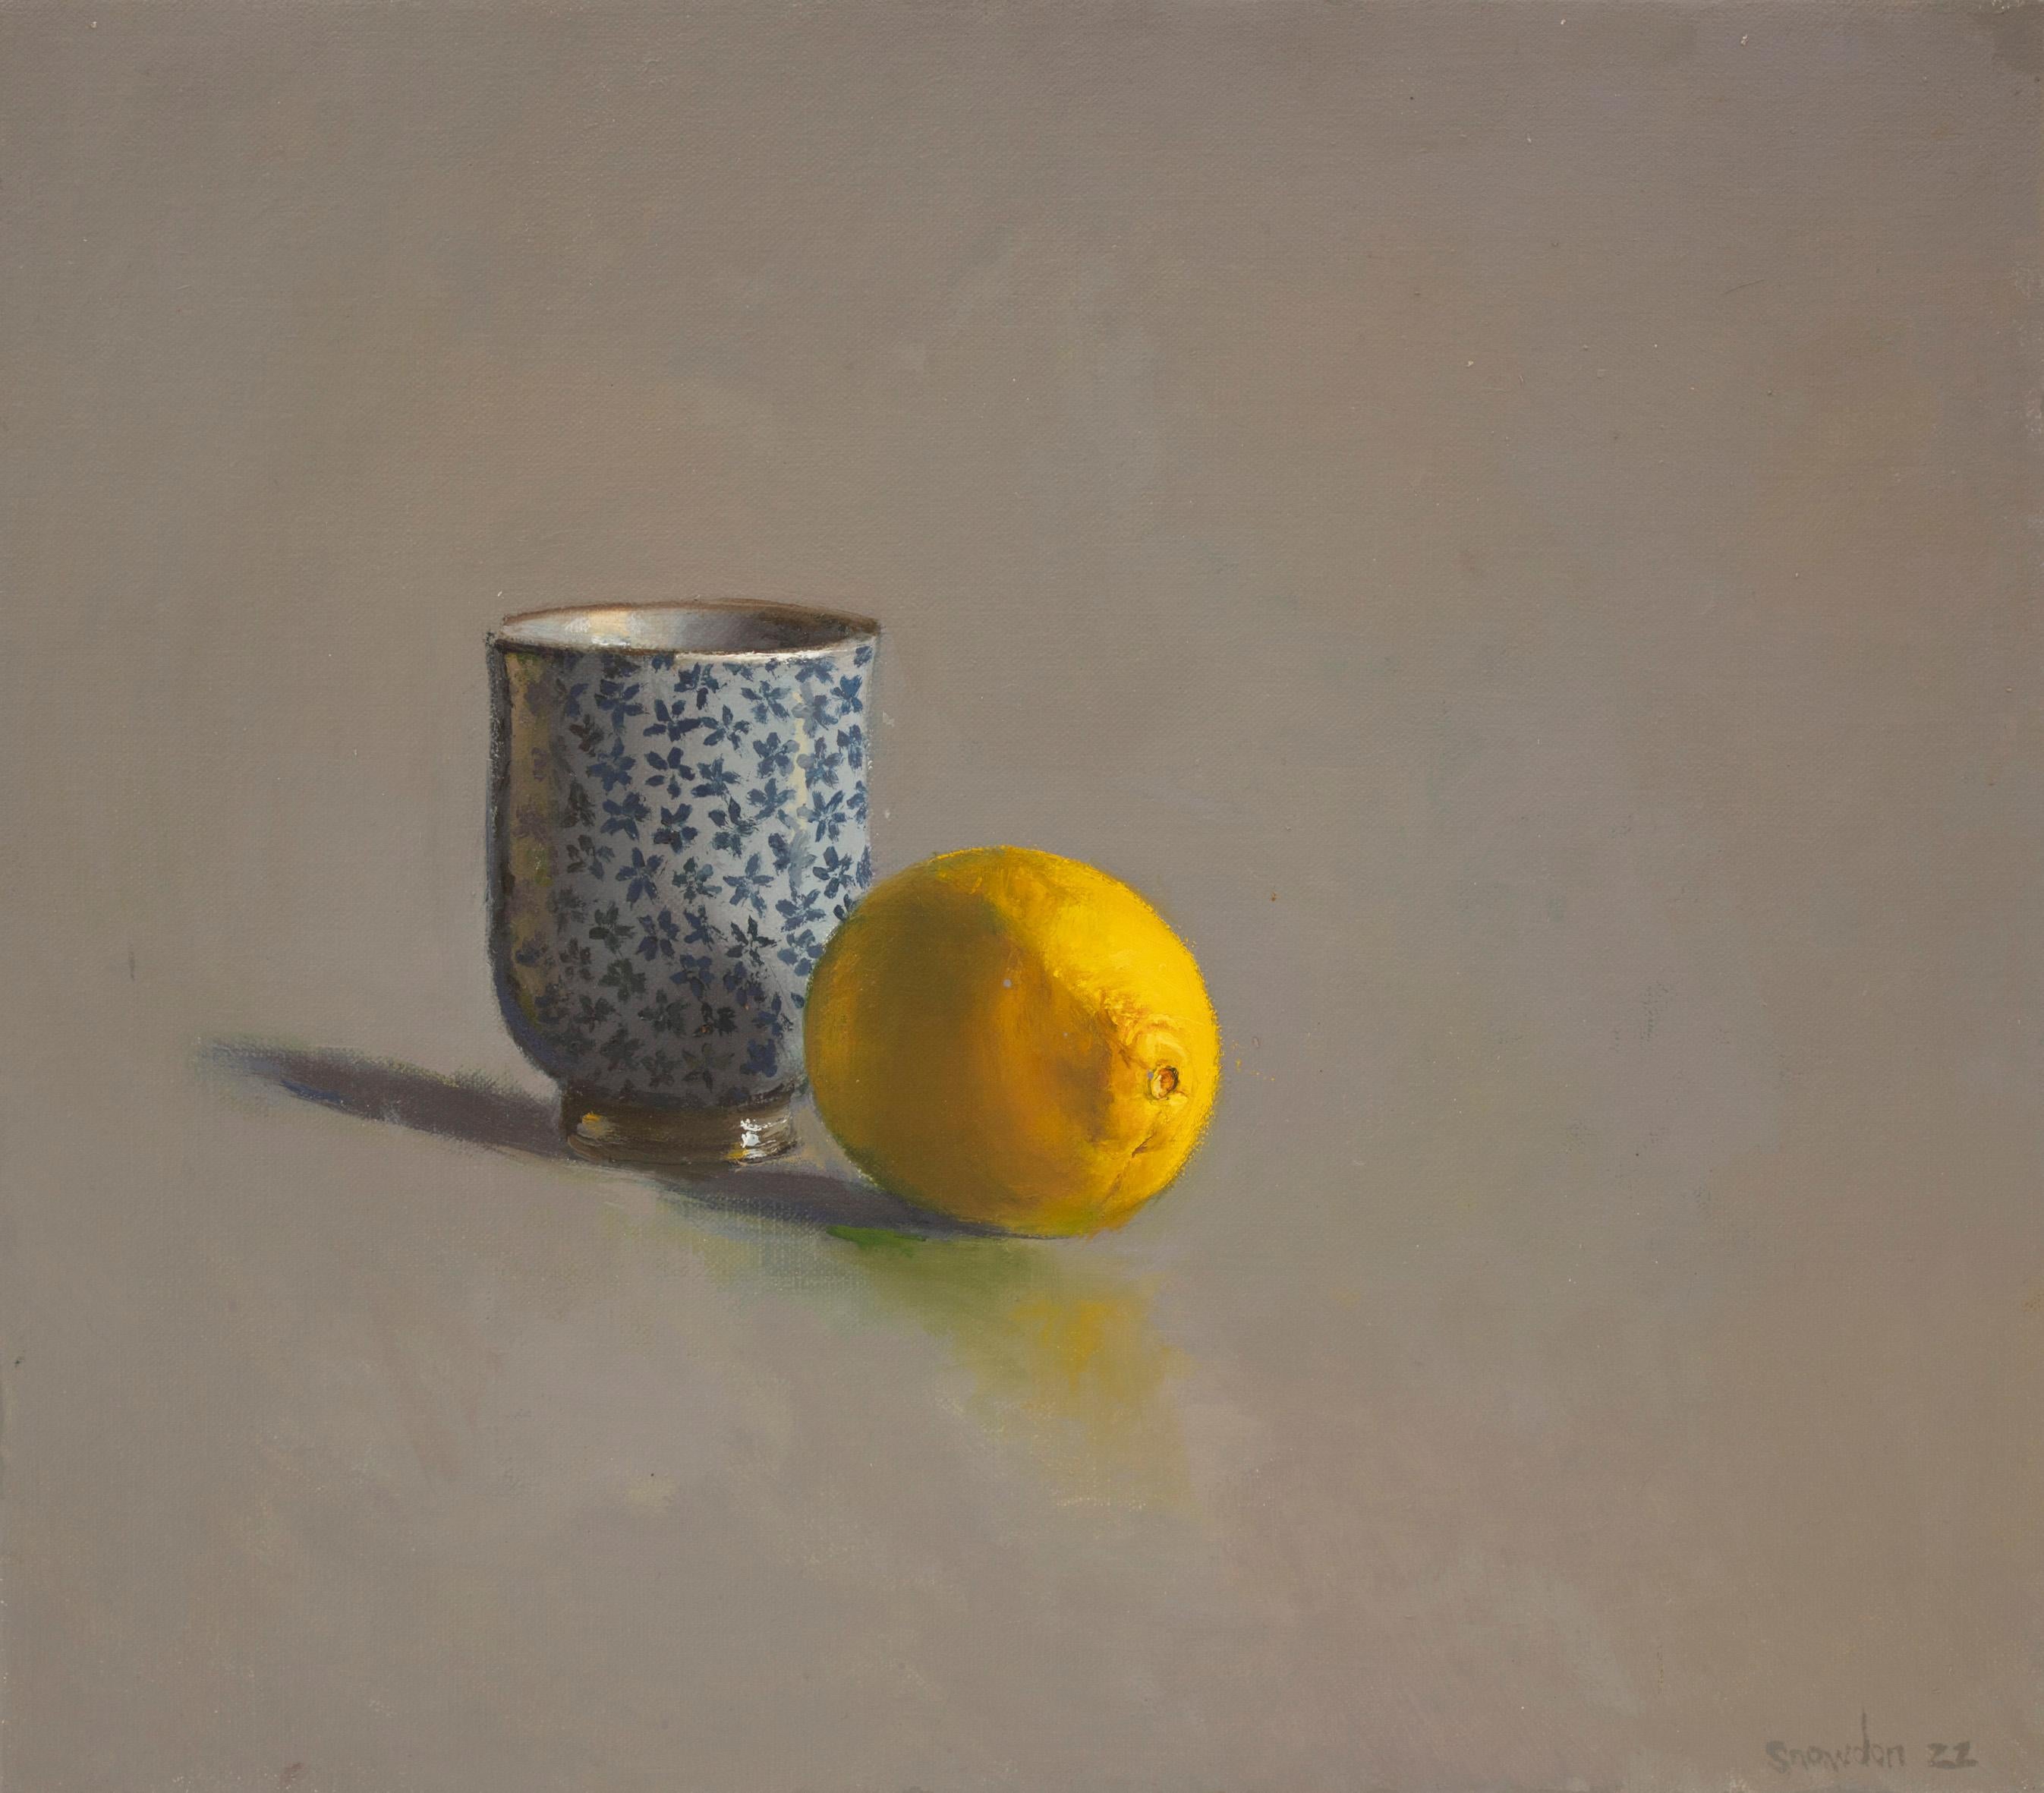 Original artwork by Tim Snowdon
Japanese cup with lemon, oil on linen, 35cm x 41cm, 2022

A part of Snowdon's exhibition ‘Conversations’, this piece references the way inanimate objects ‘speak to’ each other within still life compositions and can